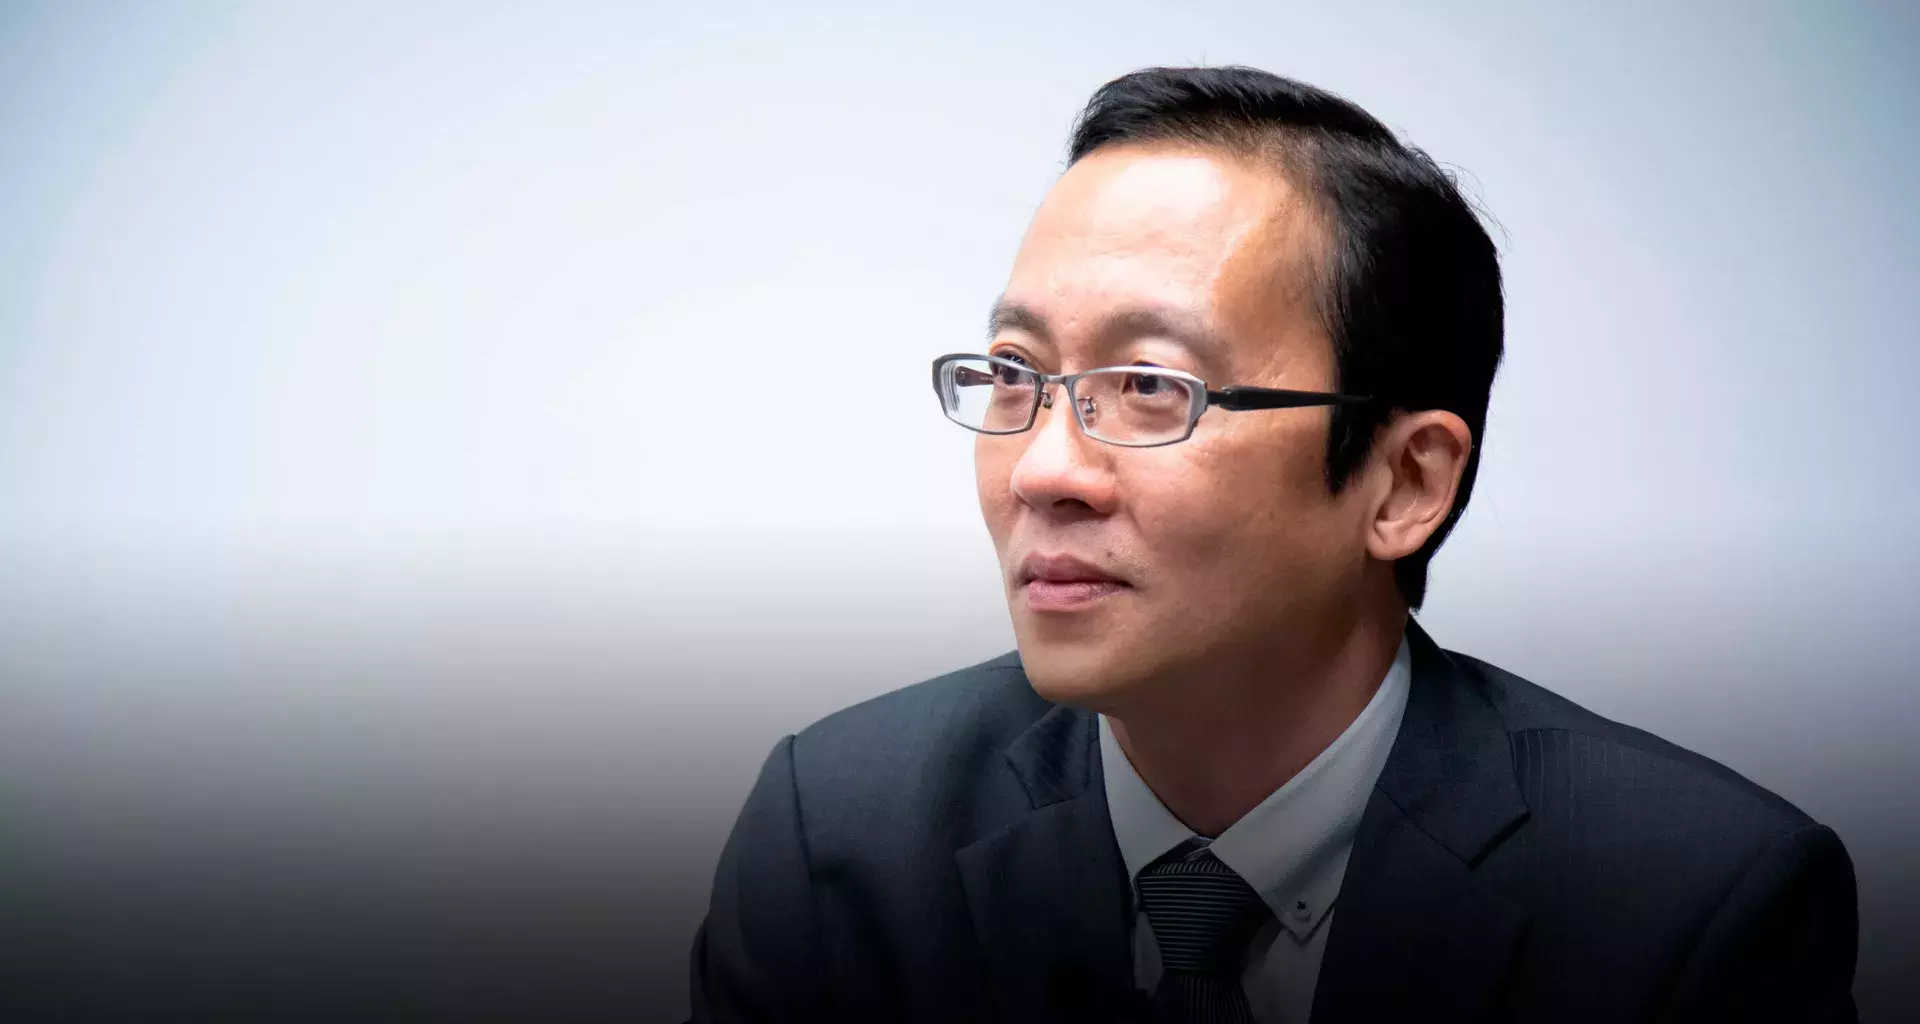 Michael Fung’s challenge: pioneering the education of the future